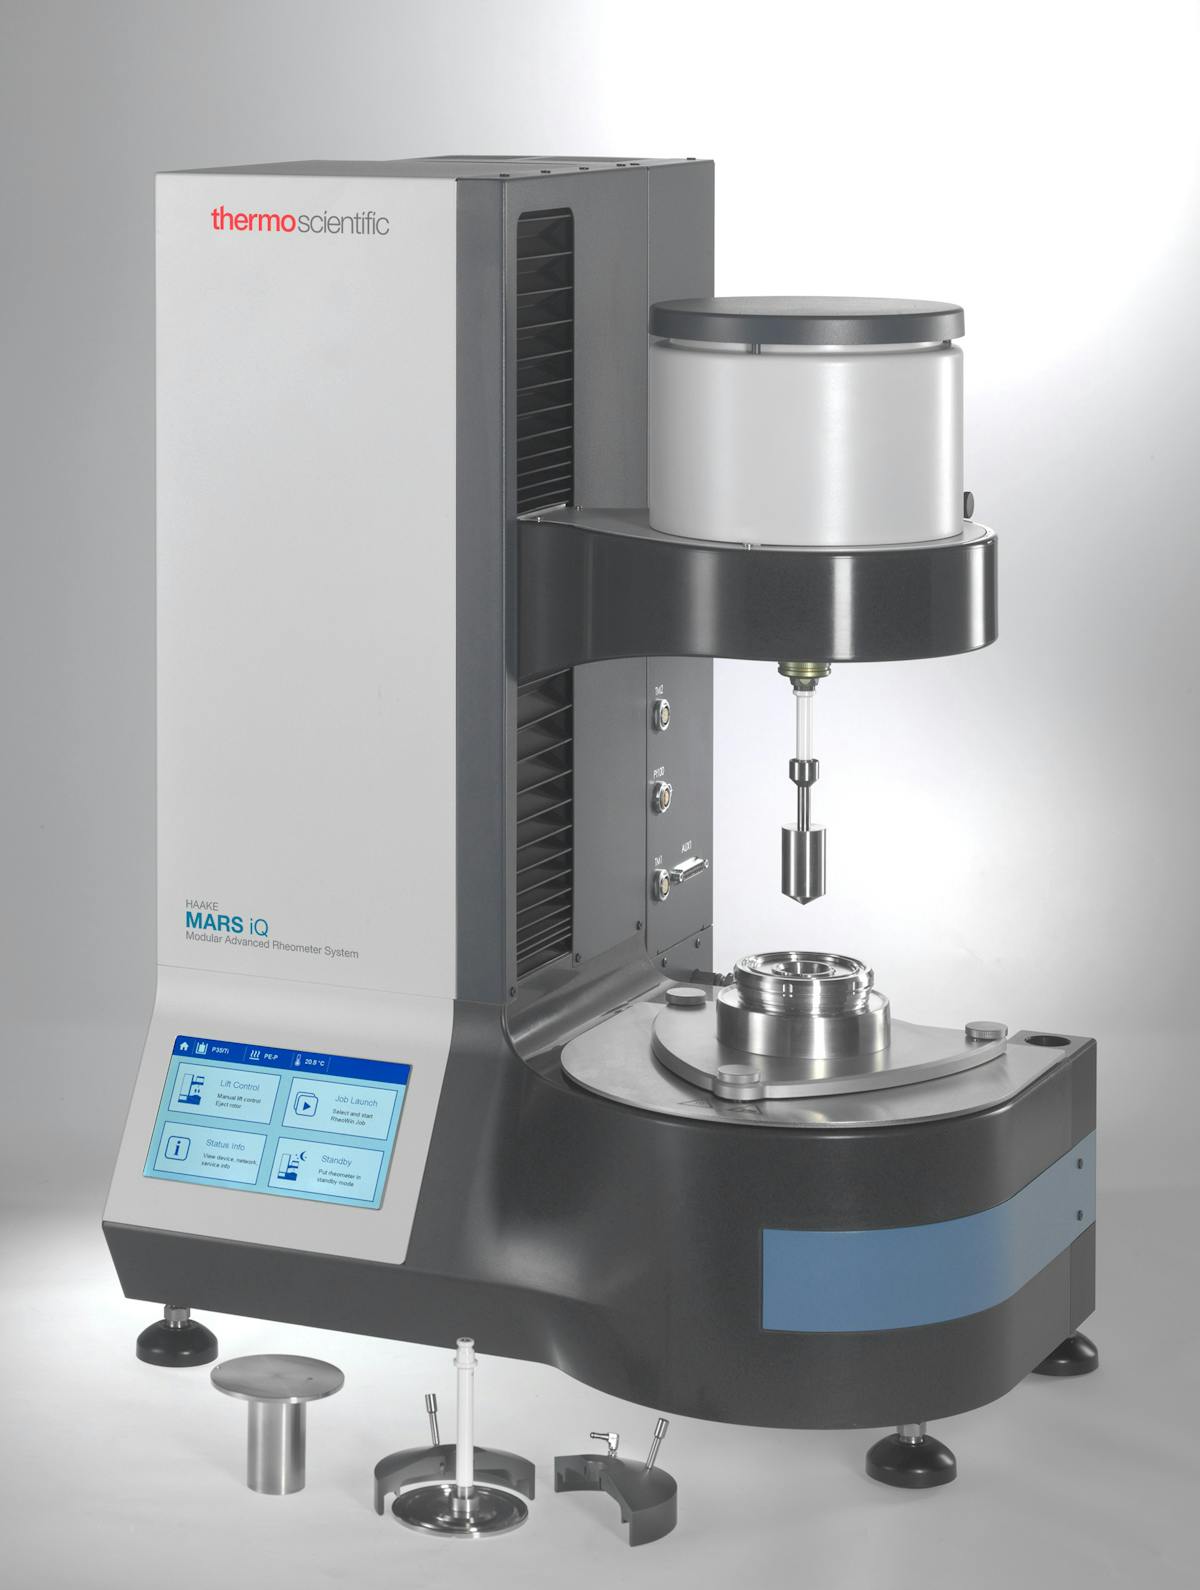 Quality-control labs can use Thermo Fisher&apos;s modular, rotational rheometer to determine the viscoelasticity of plastic materials.